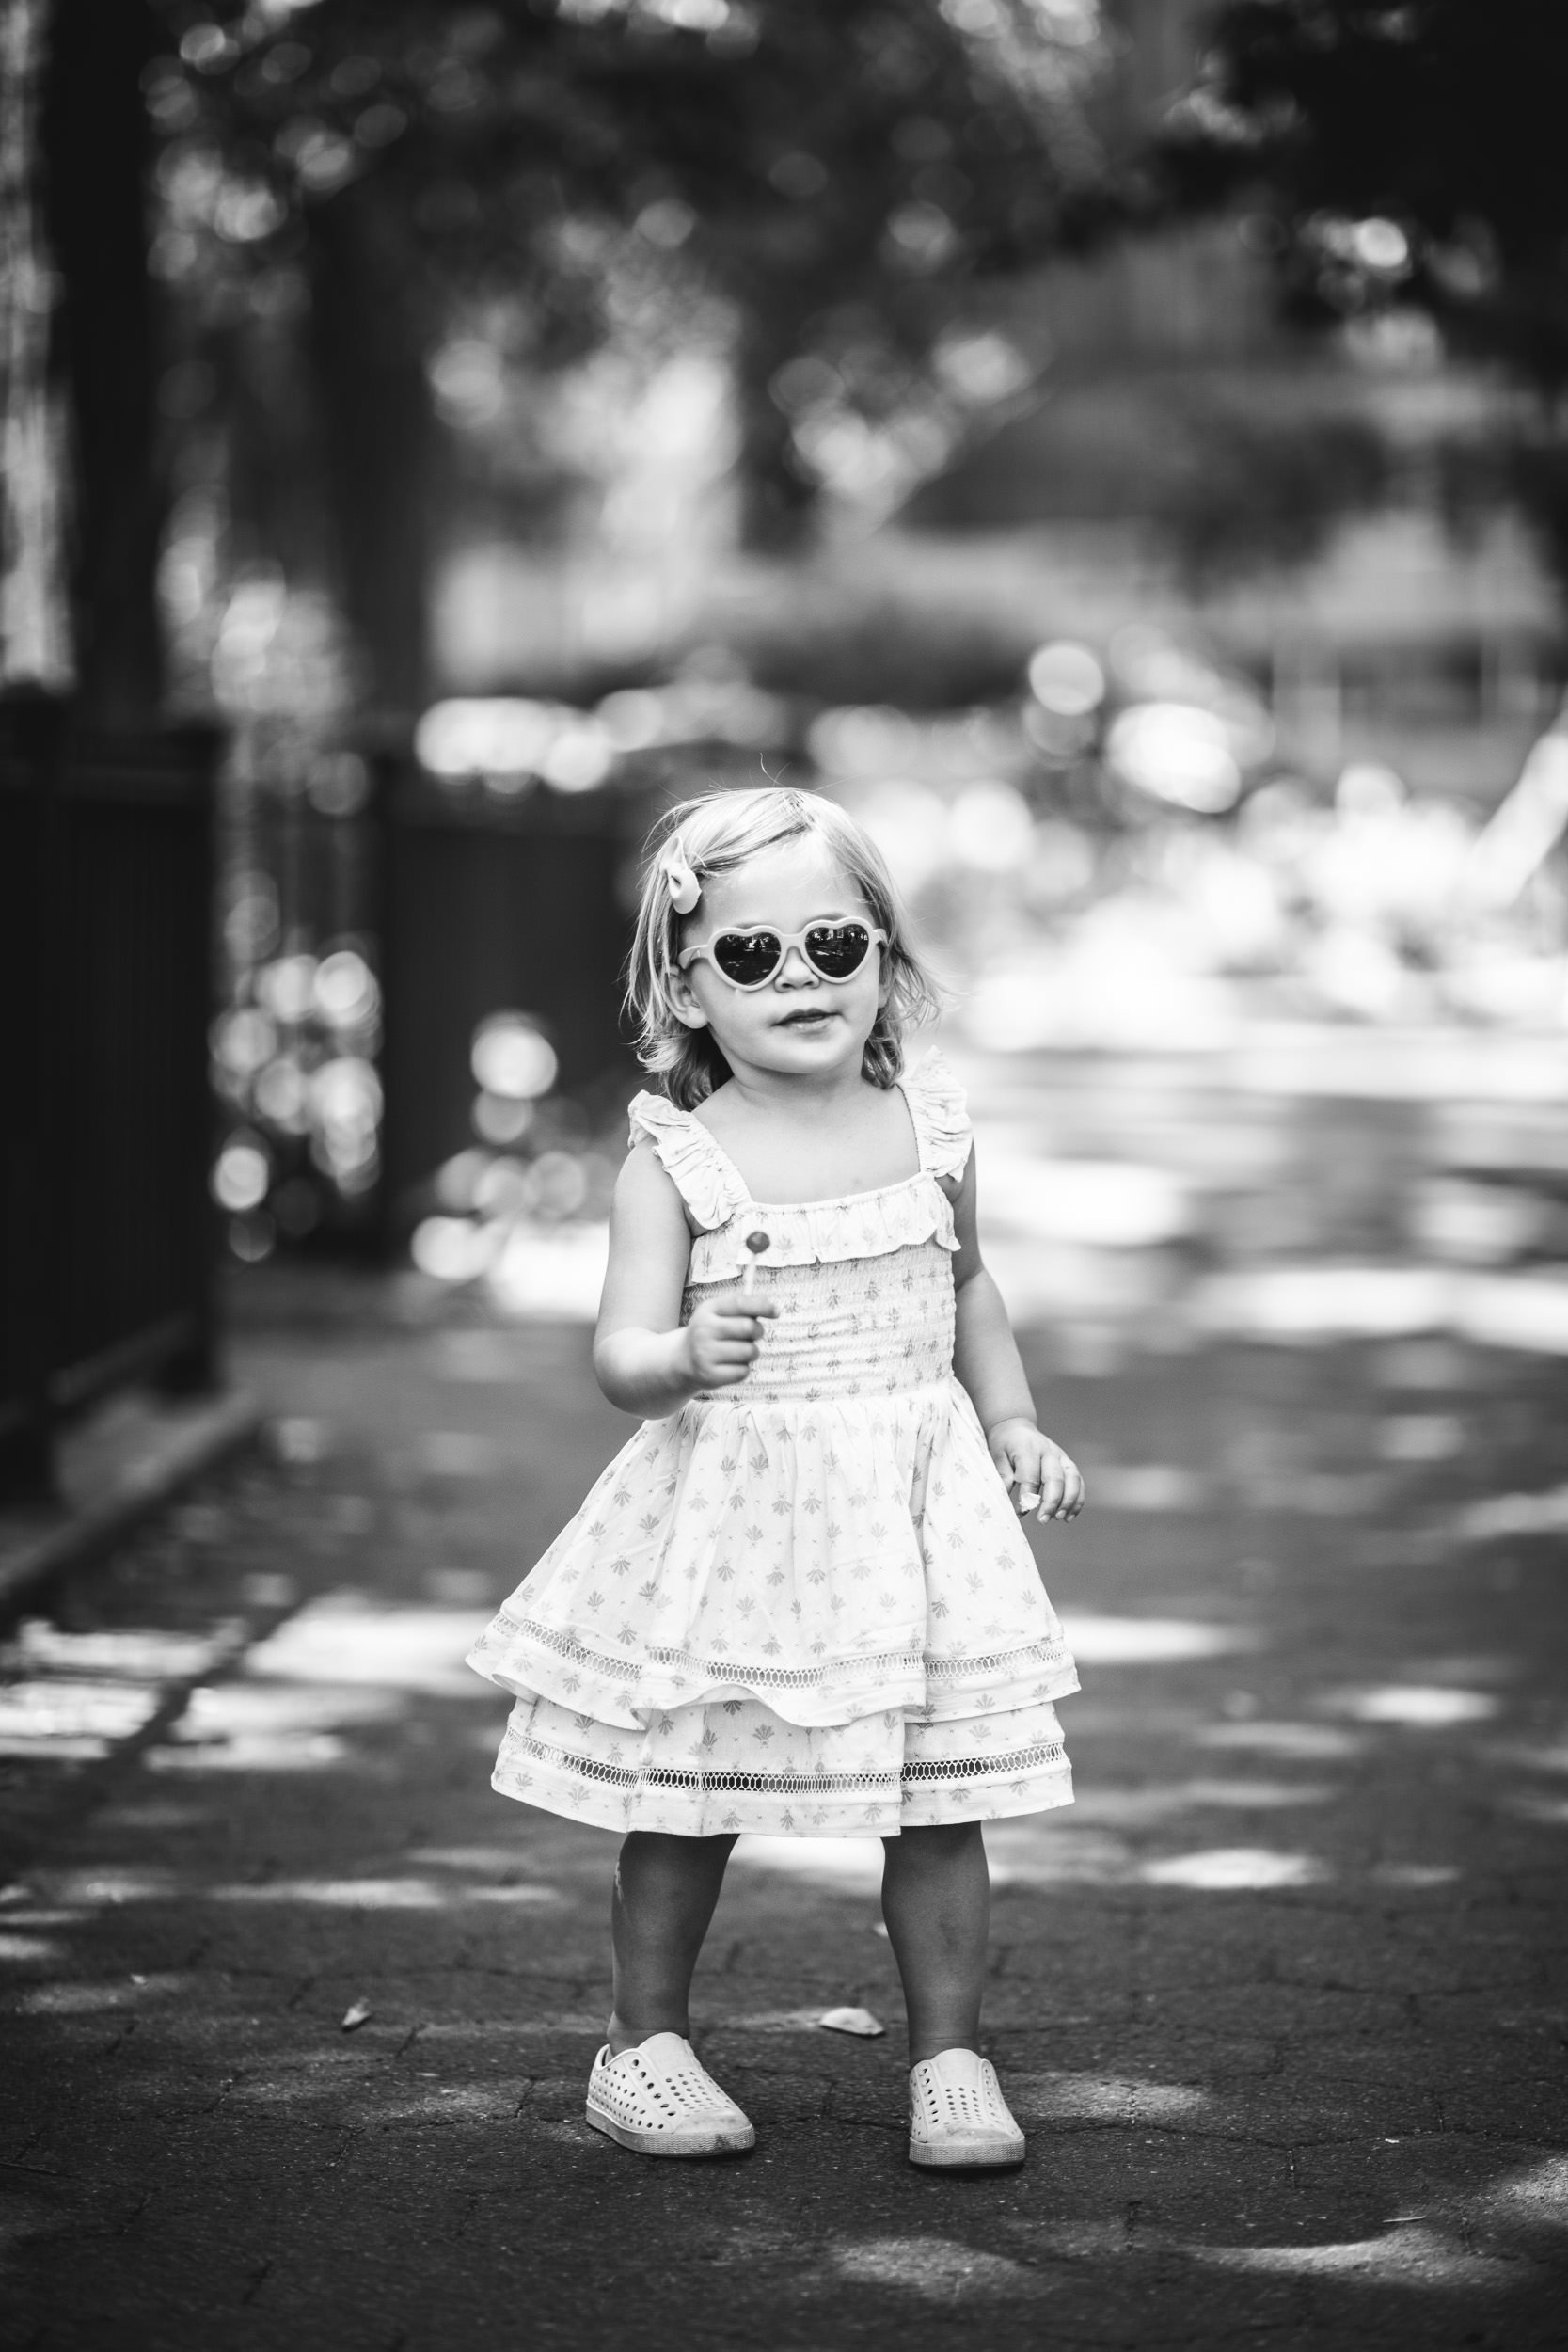  Poses for a sassy toddler girl taken in New York City by Nicole Hawkins Photography. timeless child portraits #NicoleHawkinsPhotograaphy #NicoleHawkinsChildren #NewYorkPortraits #KidsinNewYork #ChildrensPortraits #lifestyleportraits 